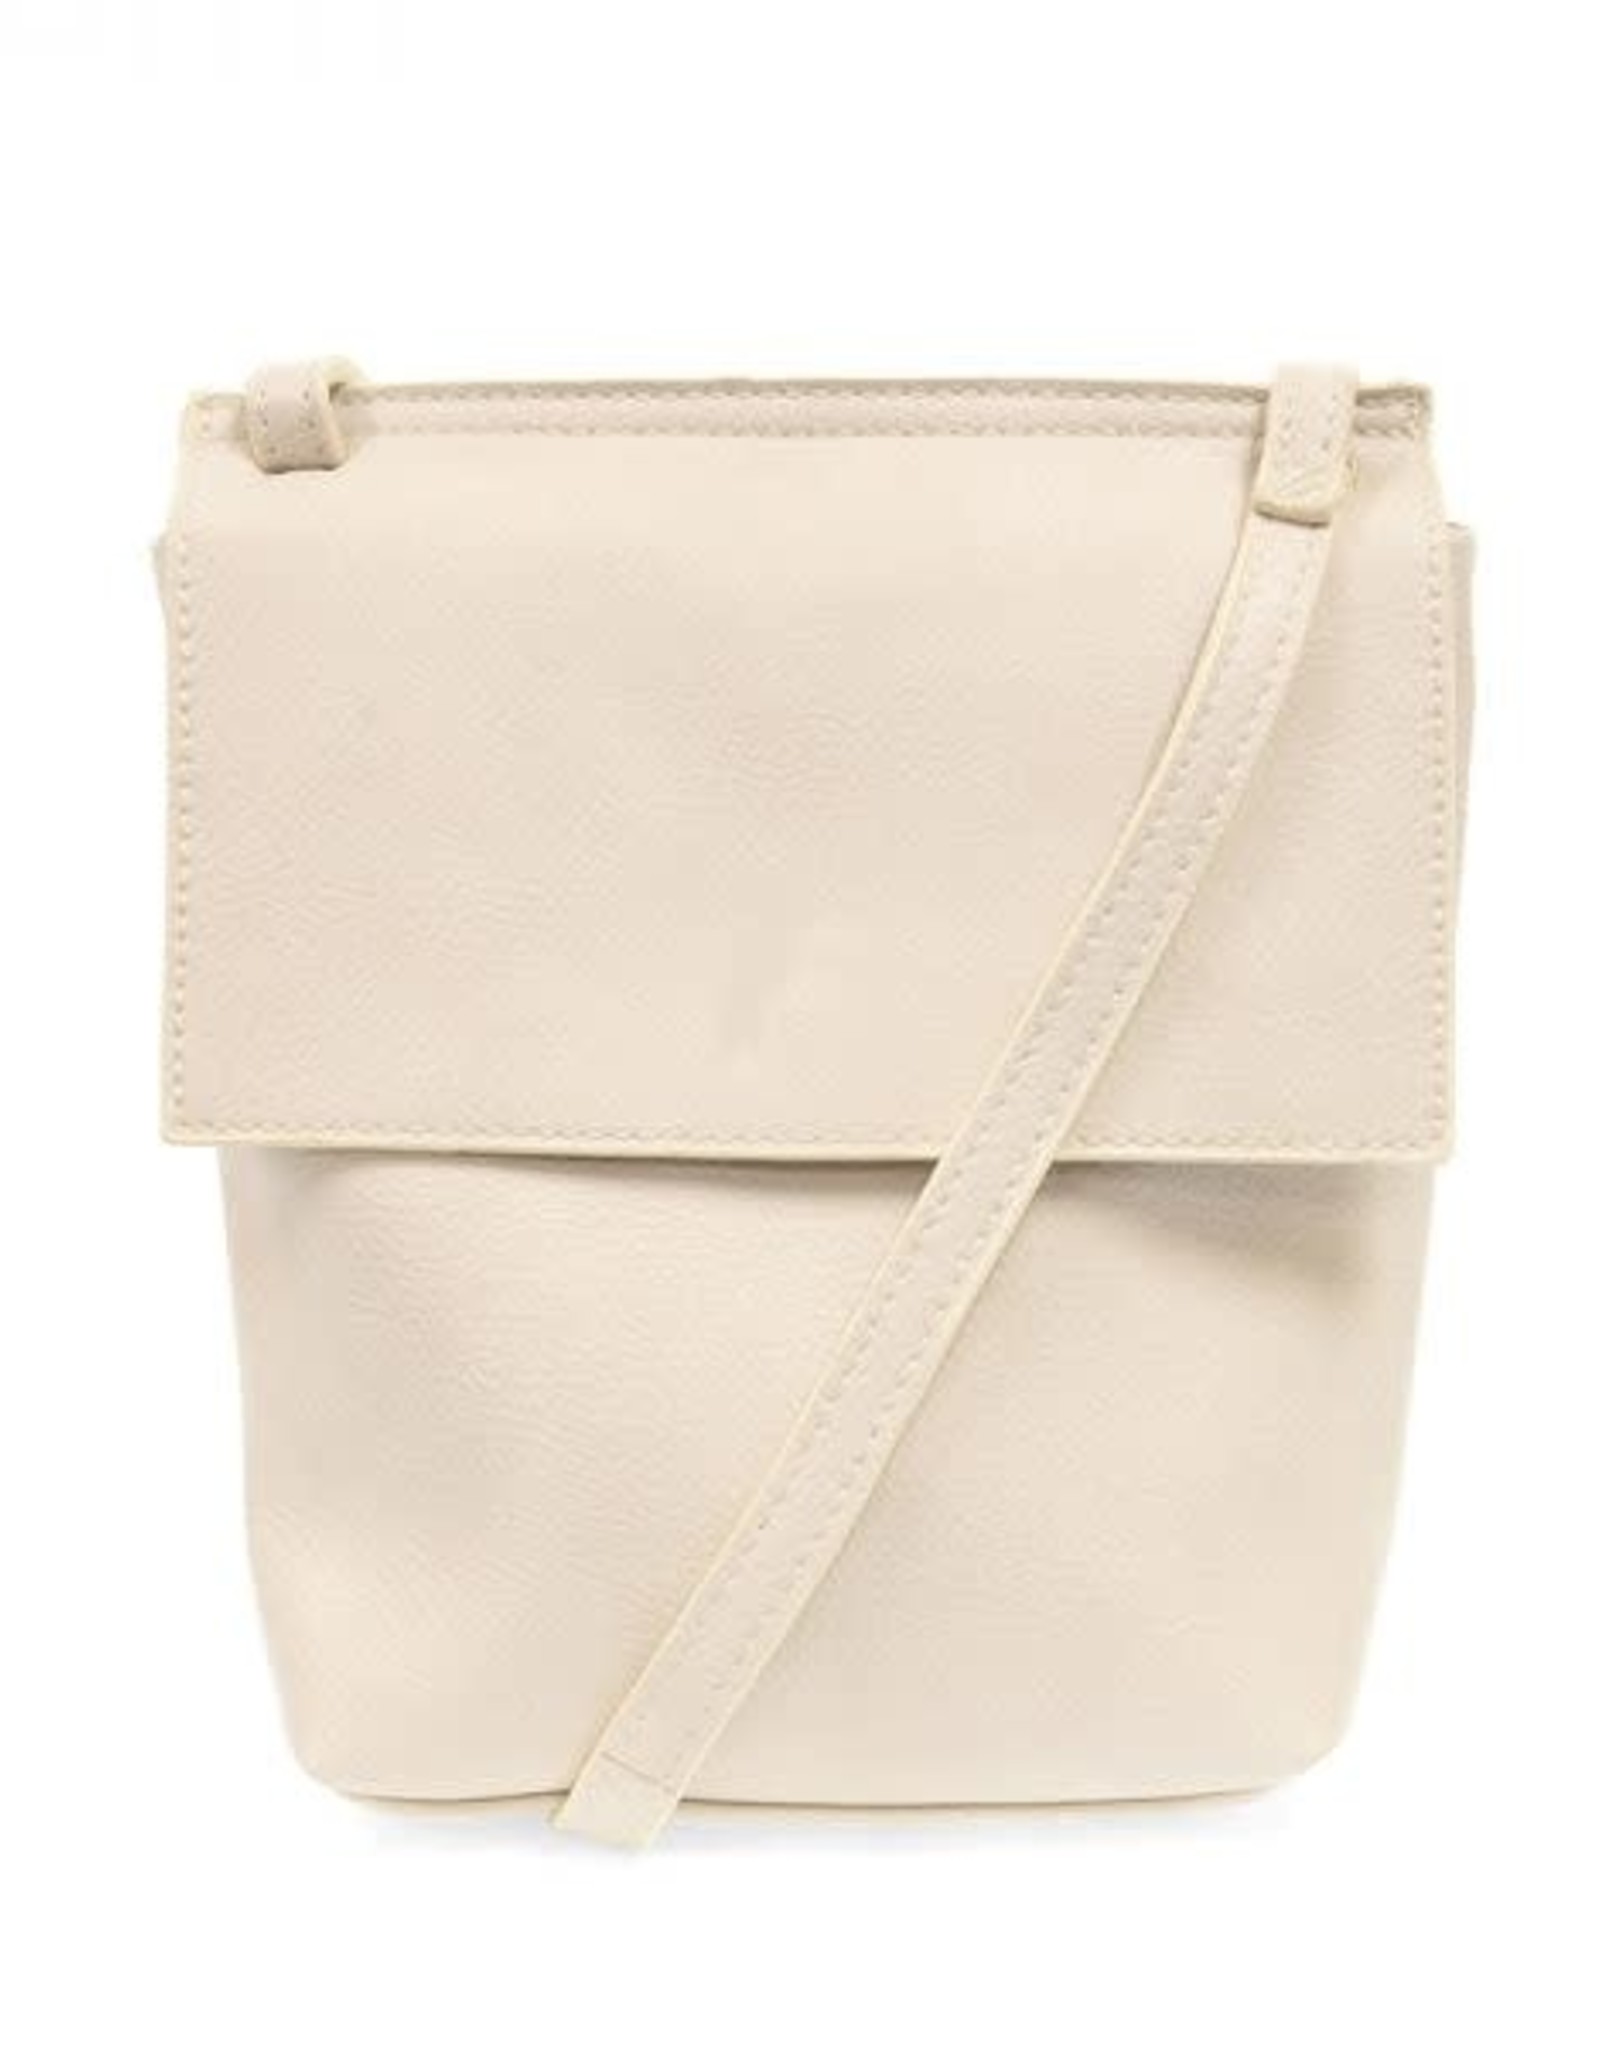 Oyster Front Flap Crossbody Bag